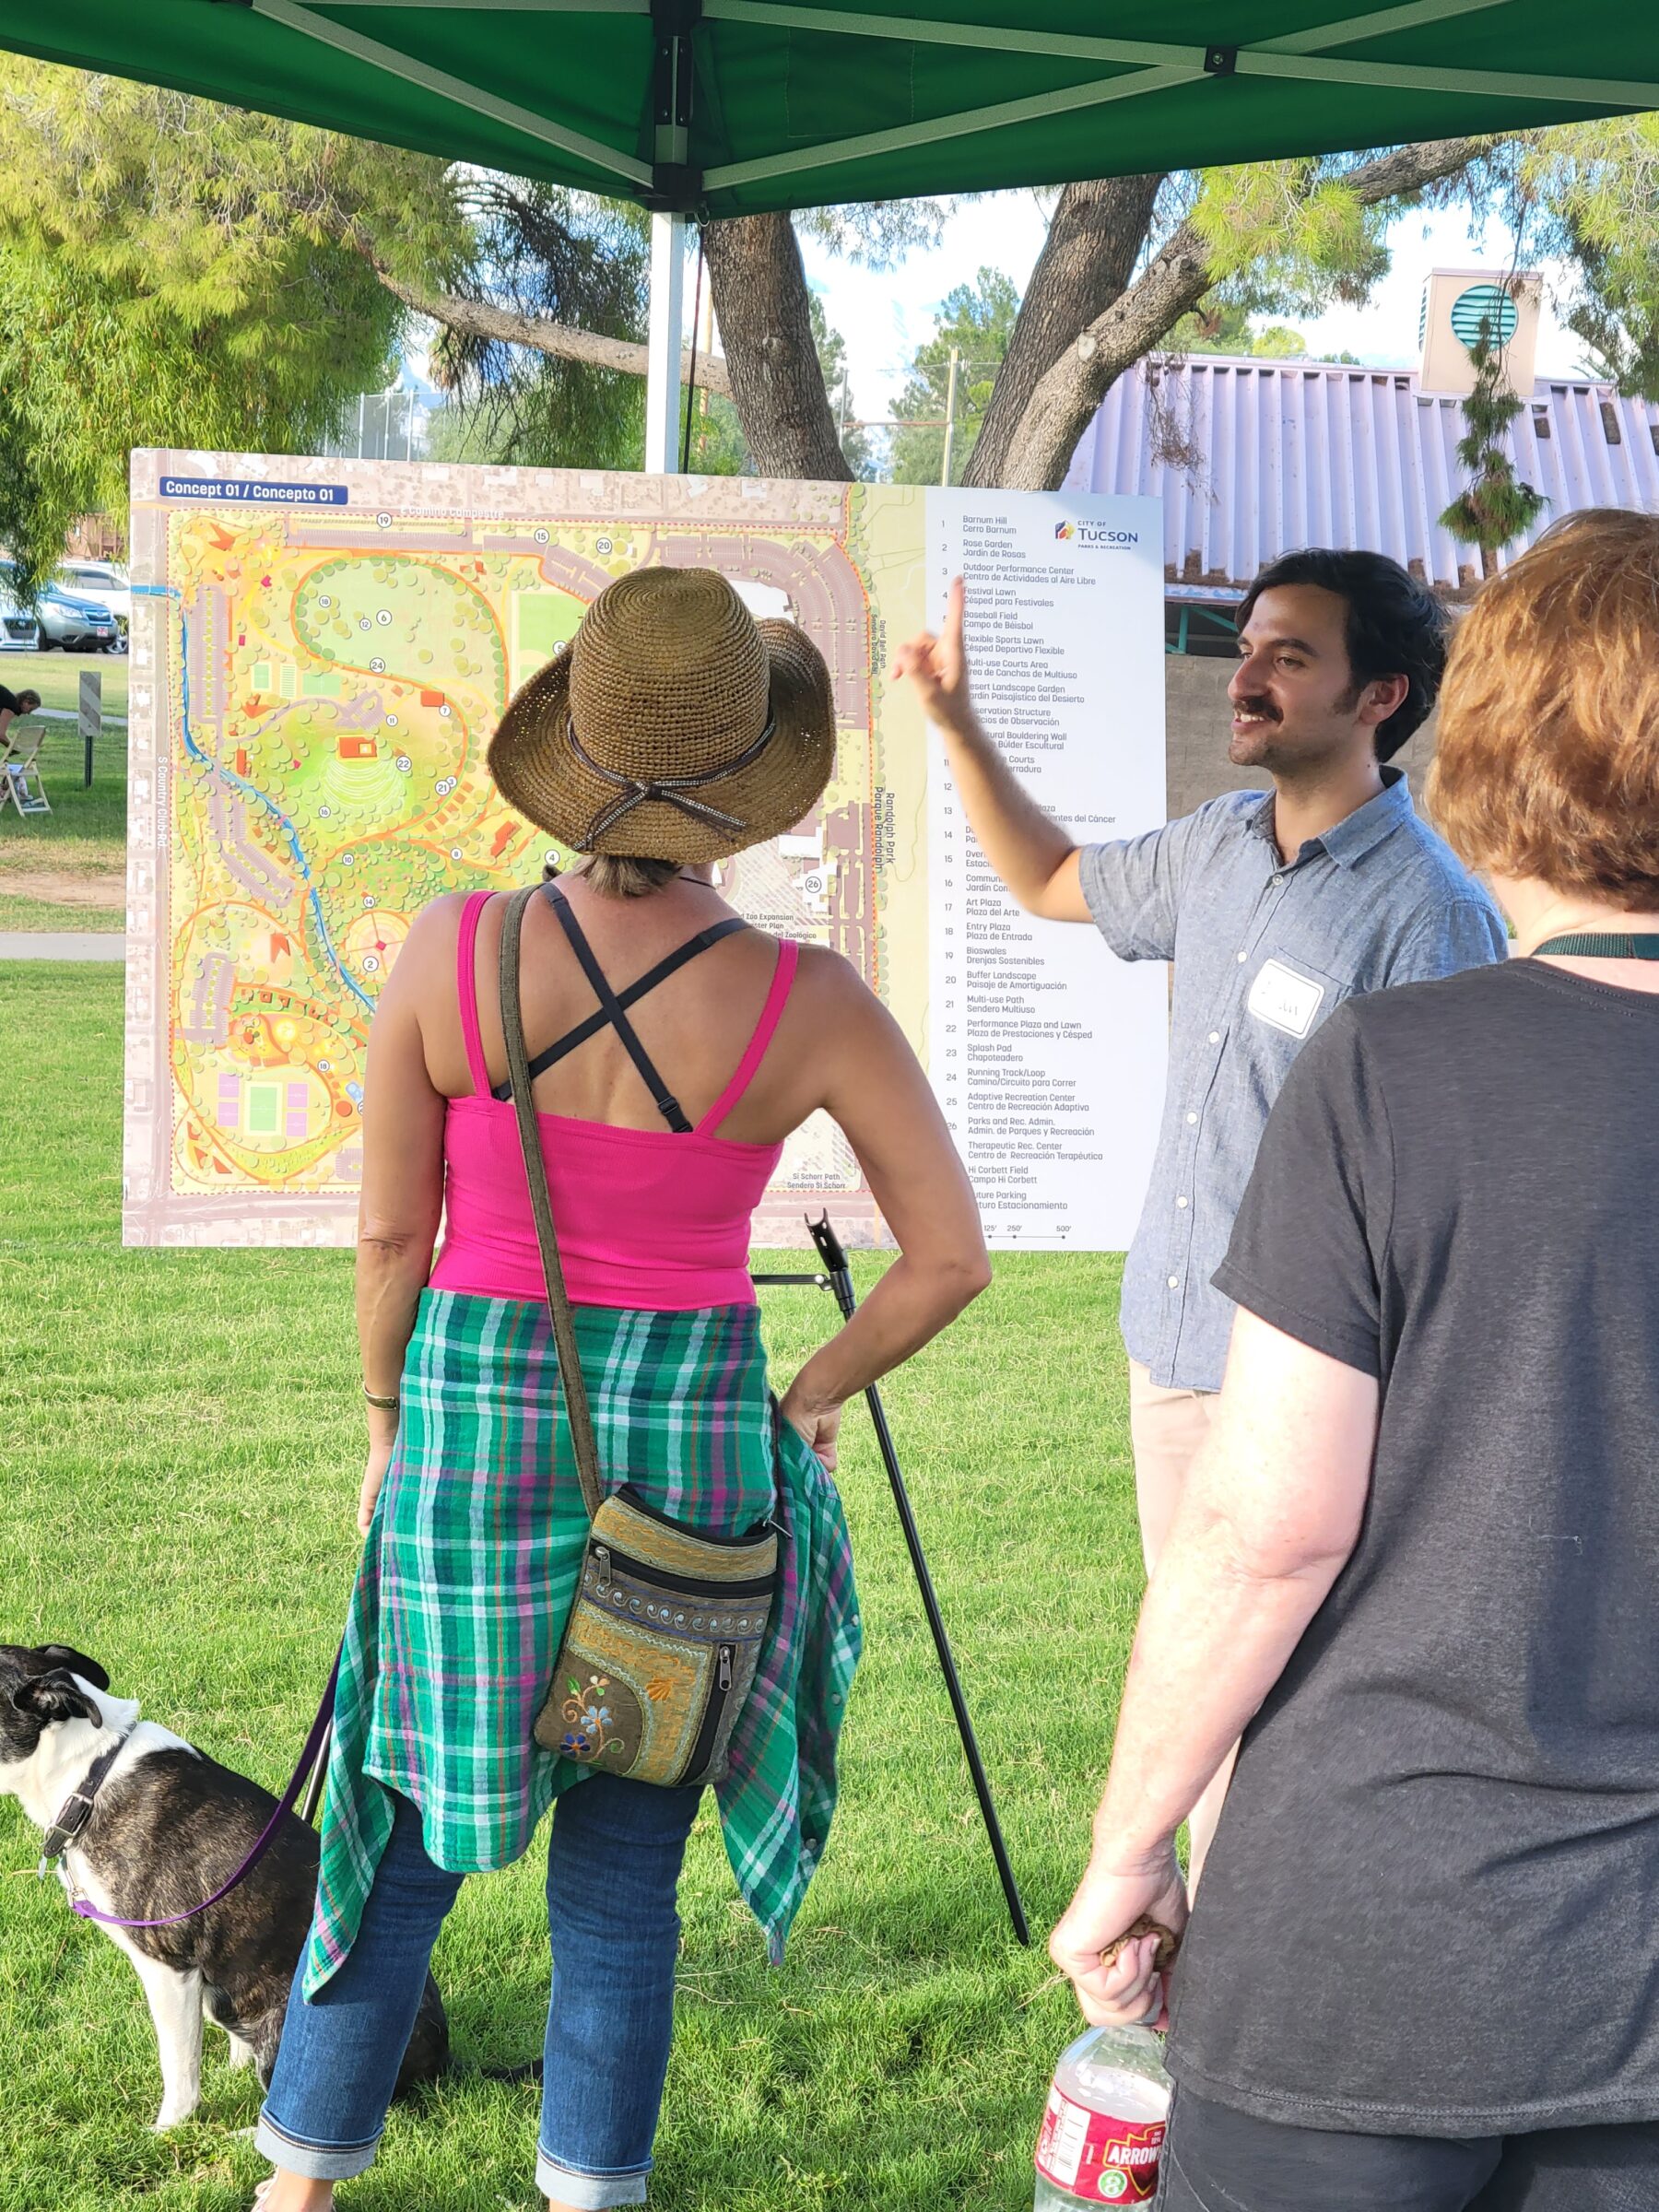 Design team member showing board with illustrated site plan to community members